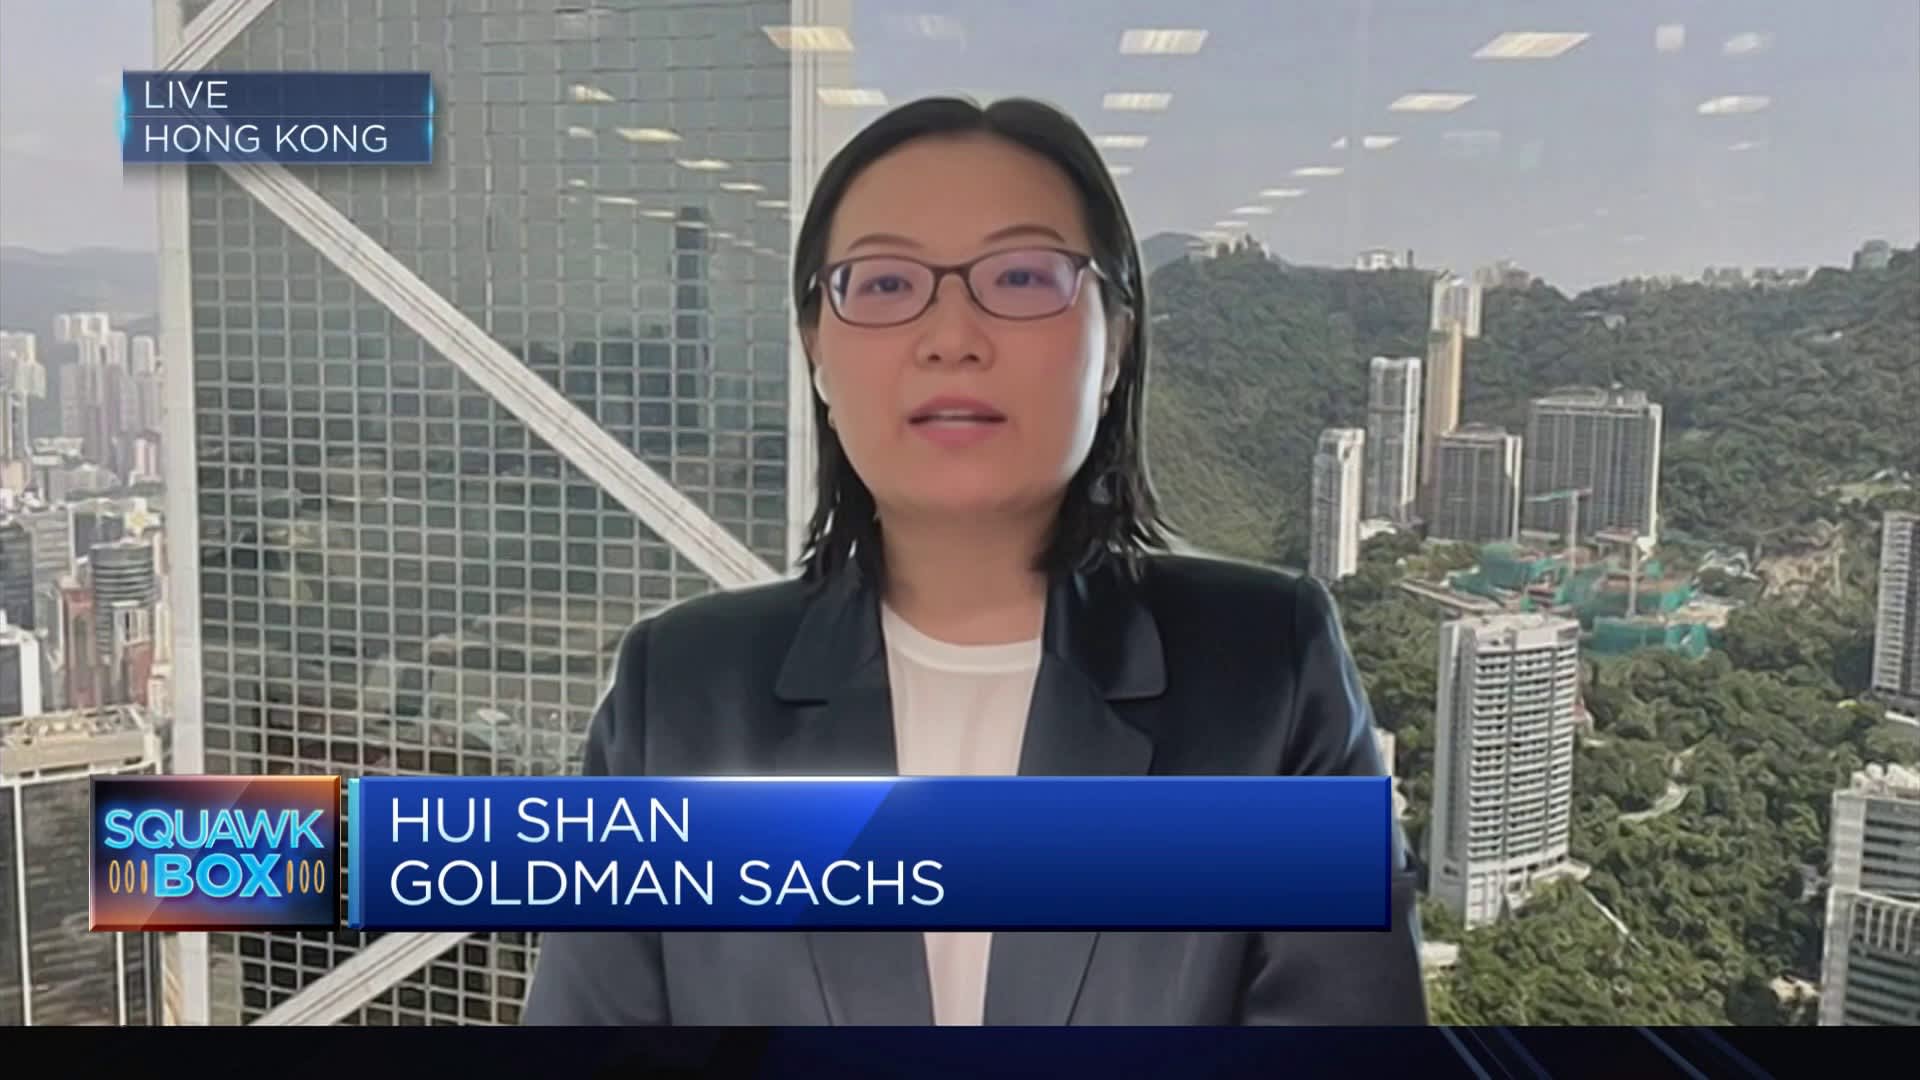 China is facing more challenges in restructuring its economy: Goldman Sachs